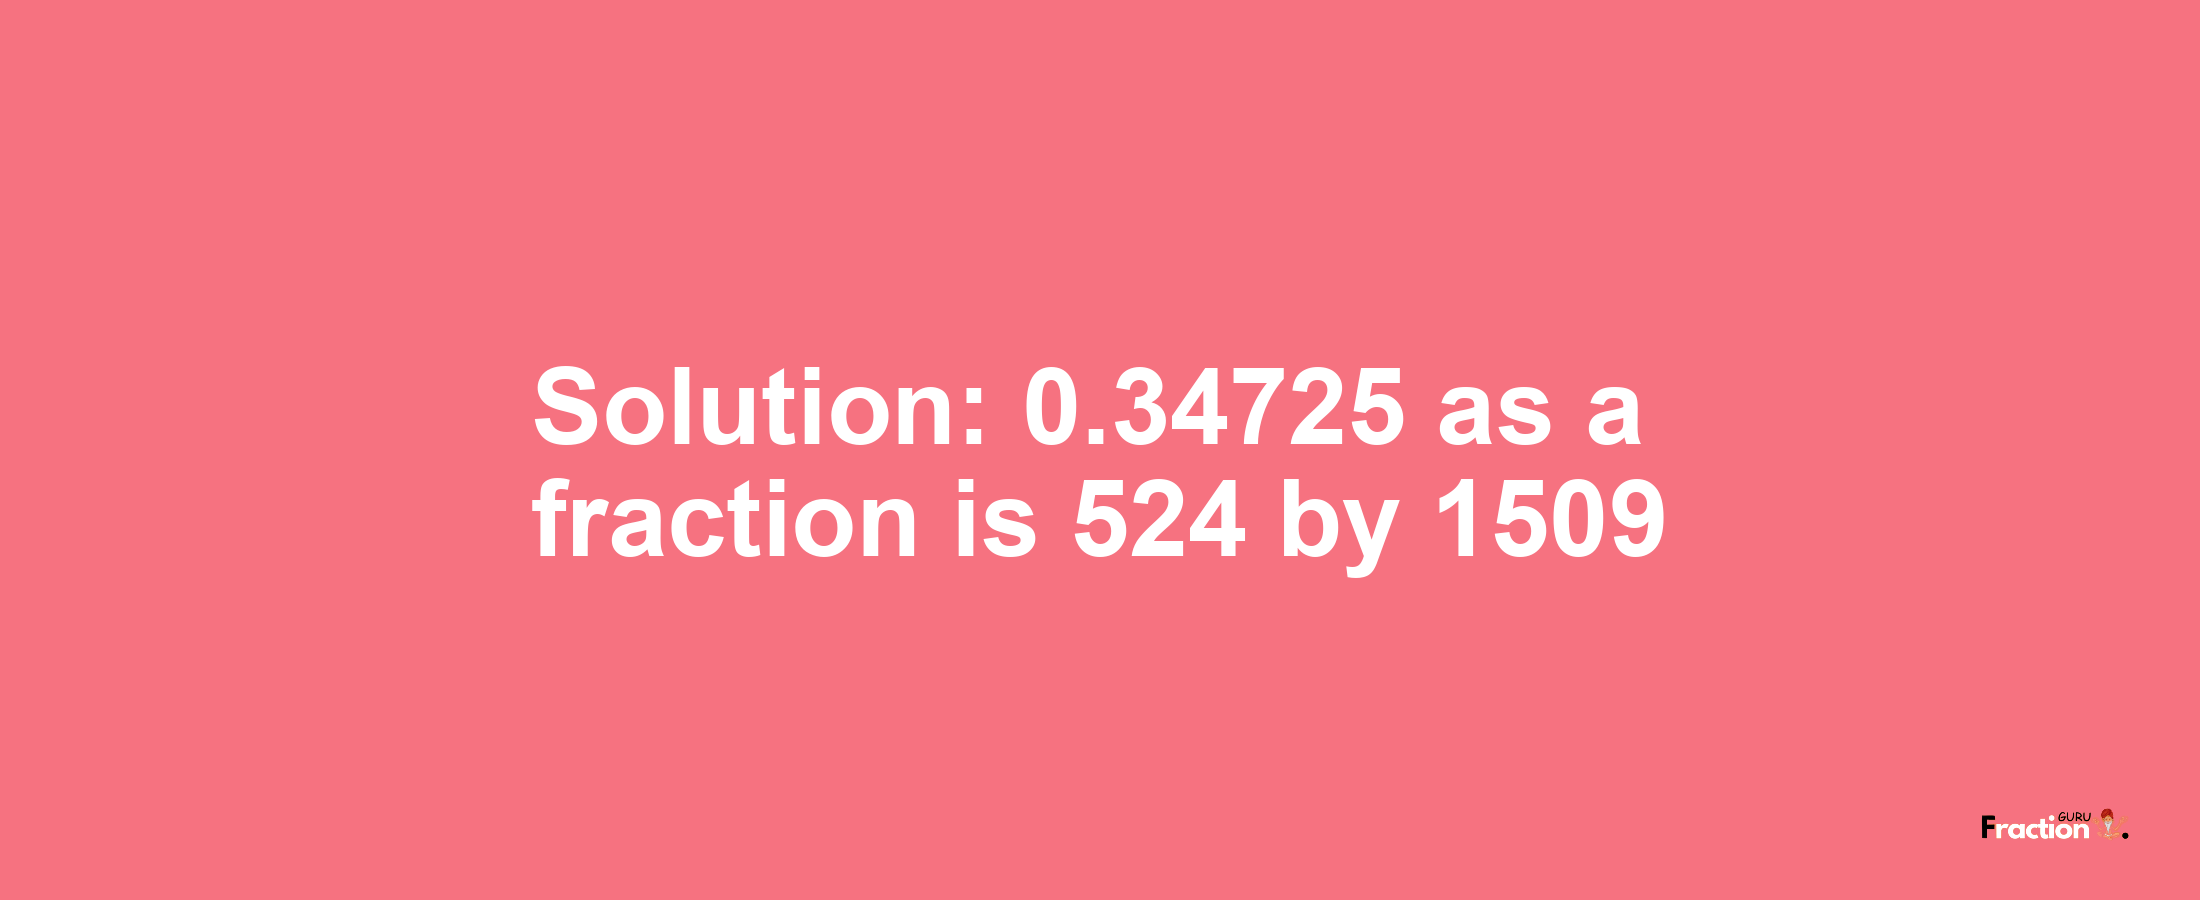 Solution:0.34725 as a fraction is 524/1509